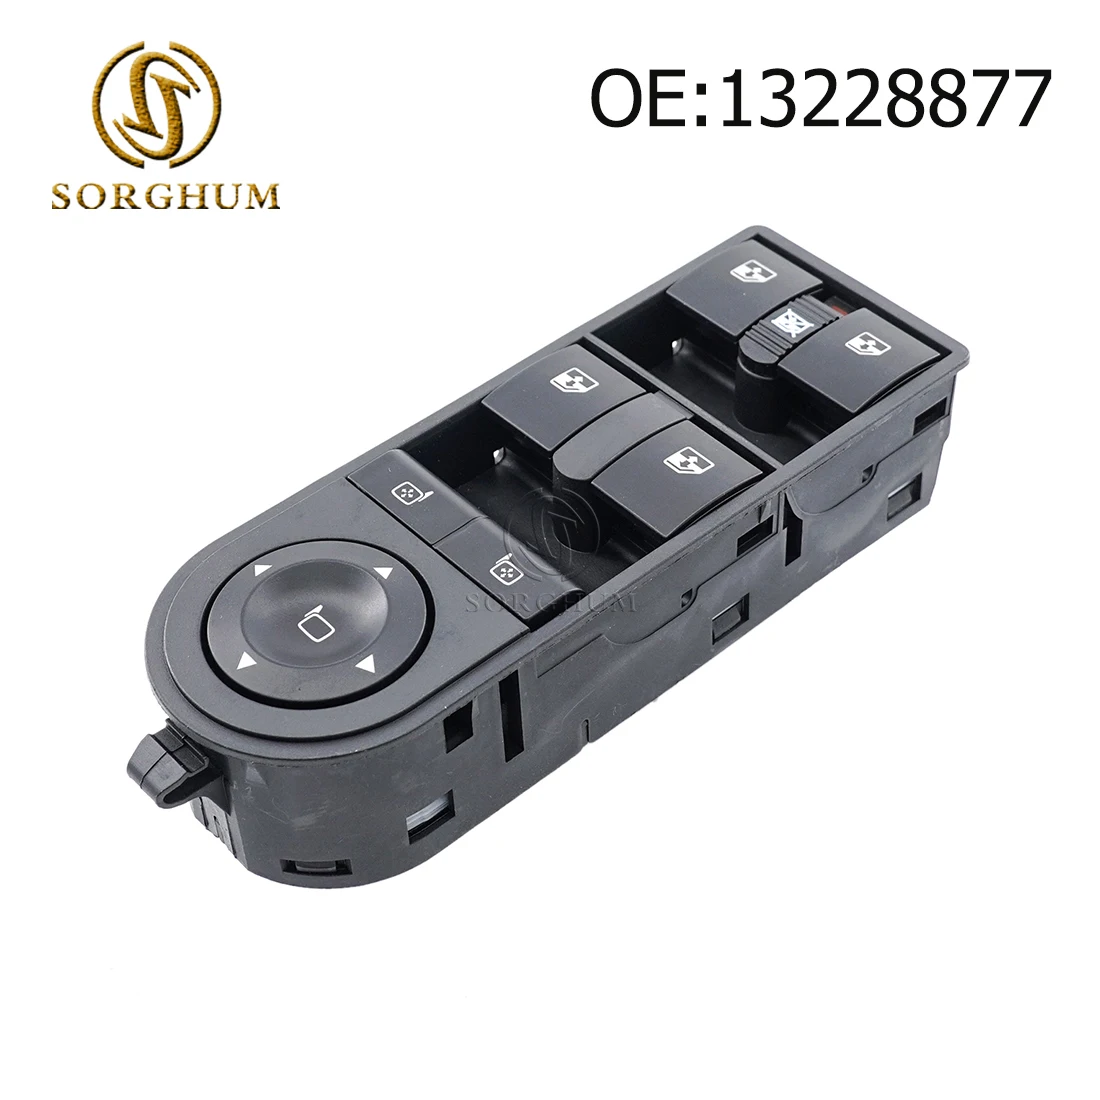 

SORGHUM 13228877 Electric Power Master Window Control Switch For 2004-15 Vauxhall Opel Astra H Zafira 13228698 13228699 13215153